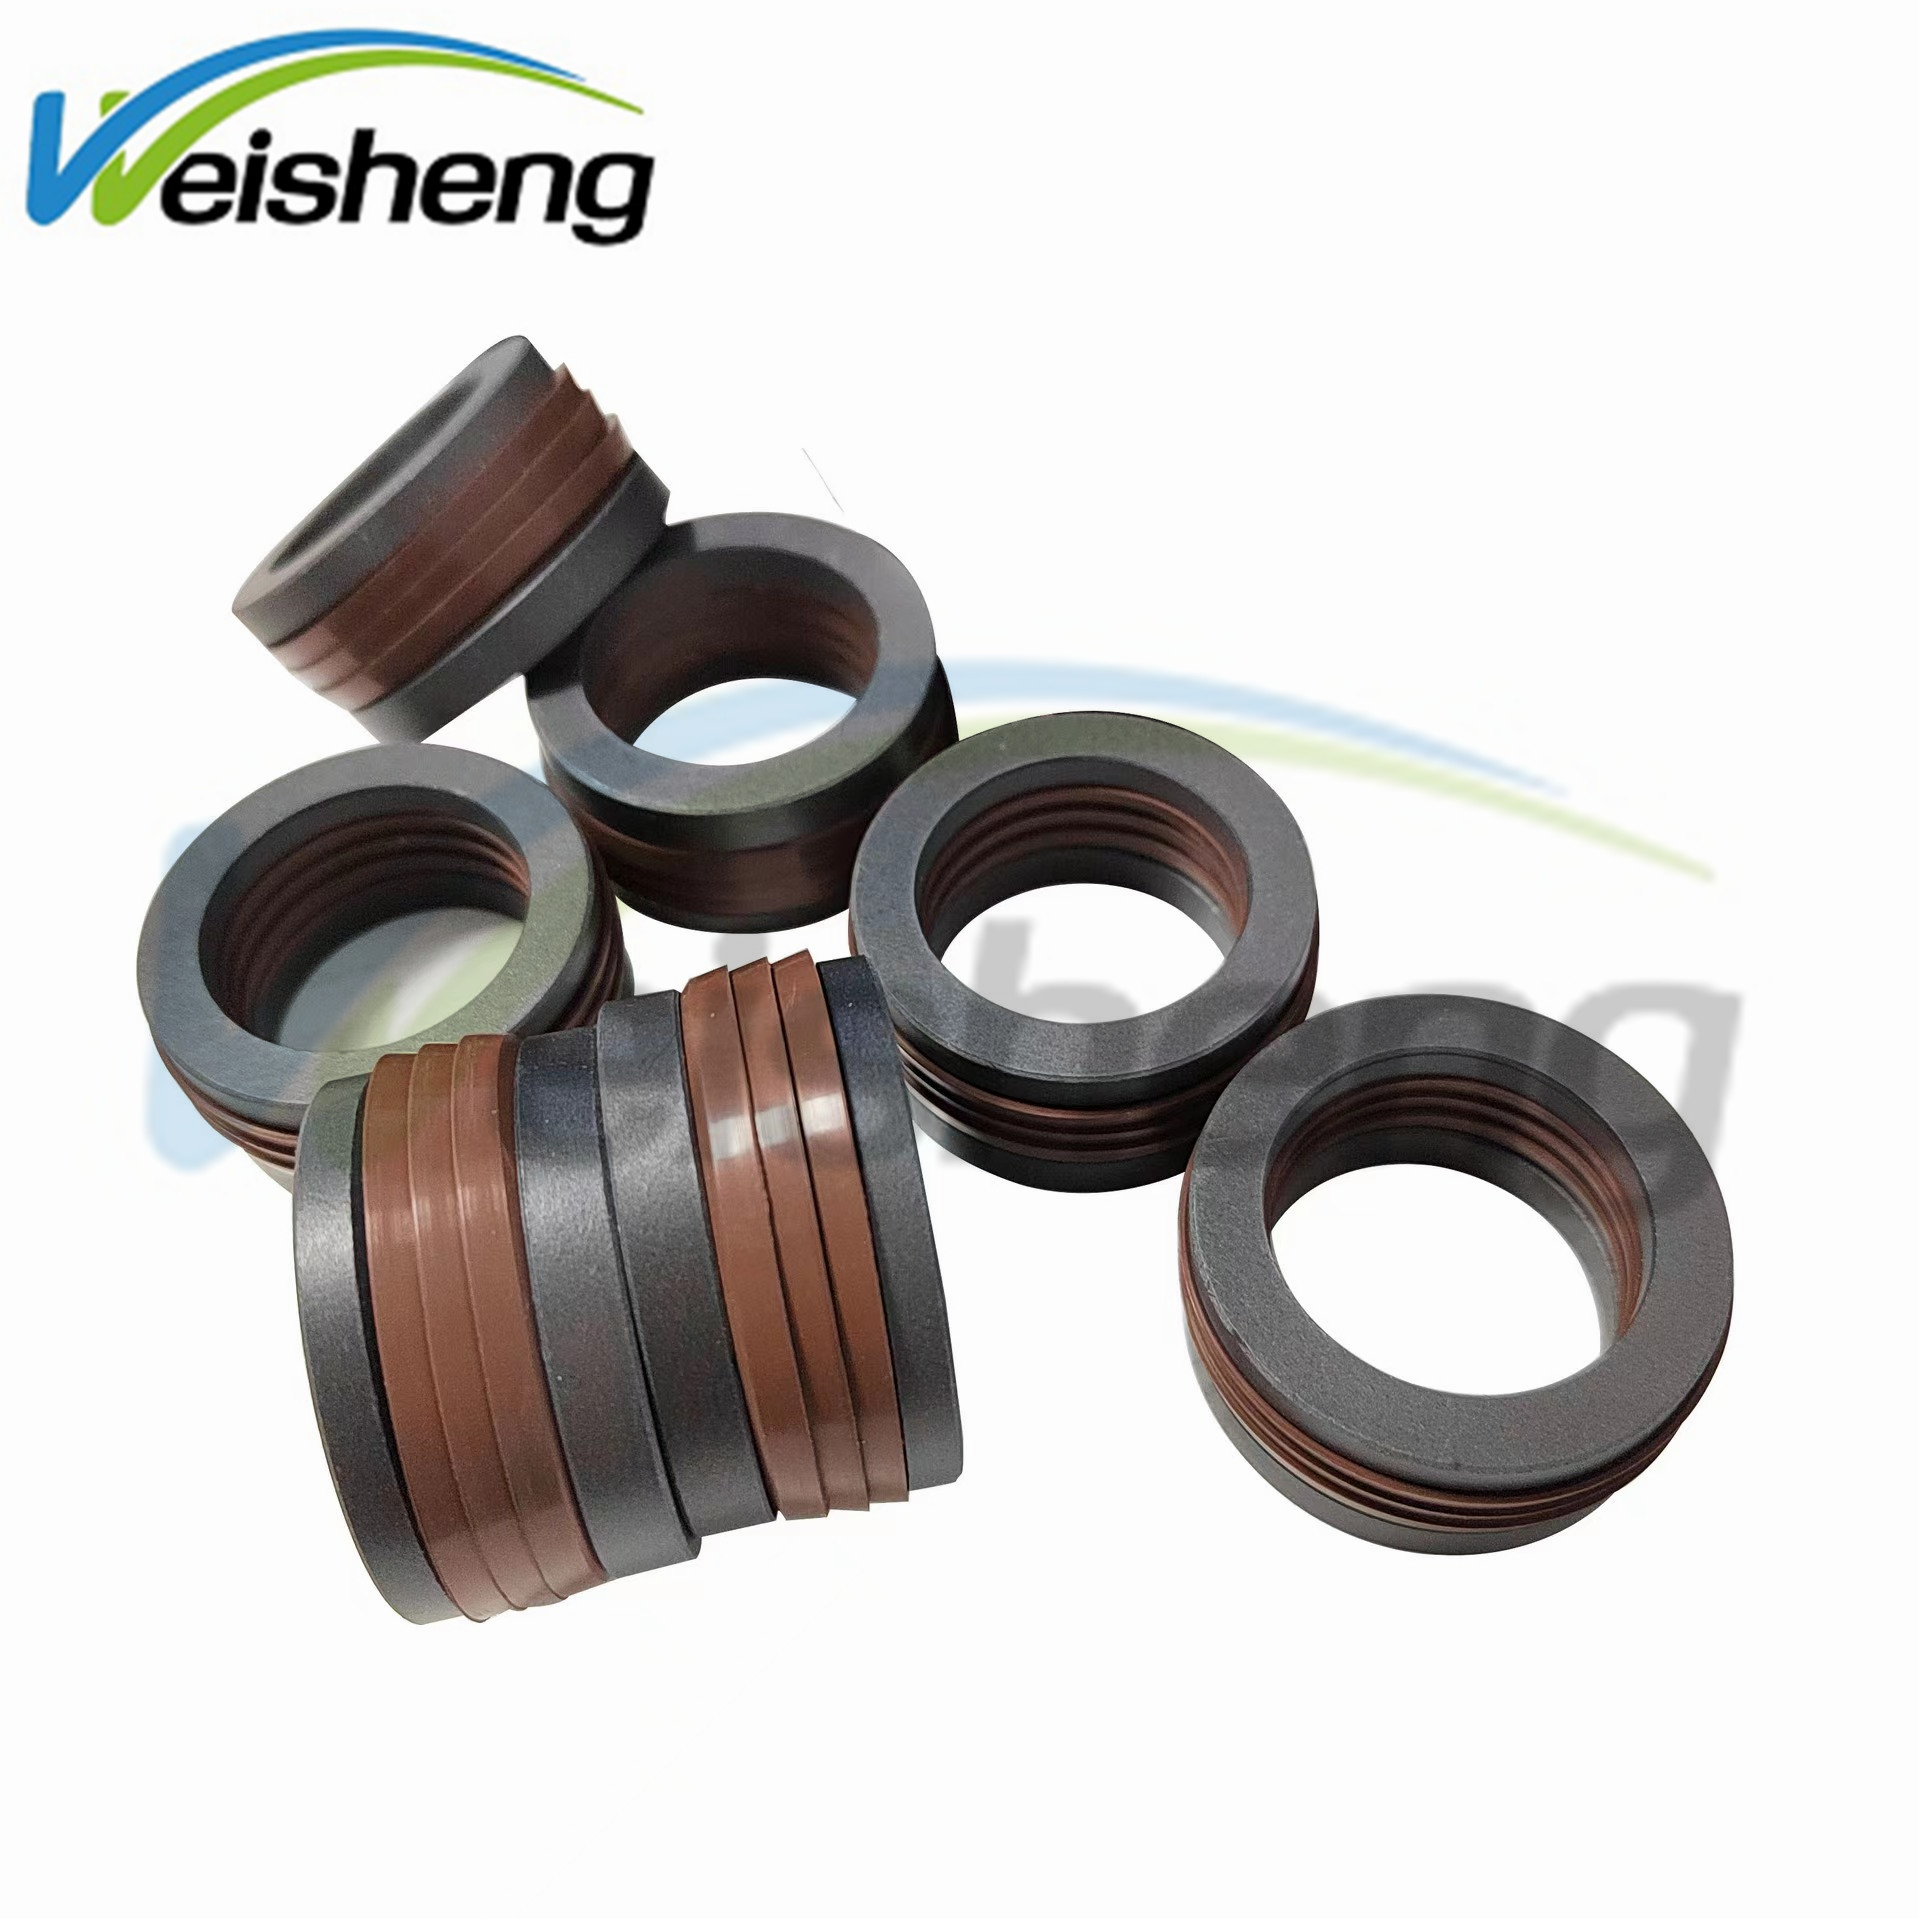 WS-SEALS Hydraulic Cylinder Oil Seal FKM PTFE Copper Powder High Temperature Wear Resistant Combination Oil Seal 